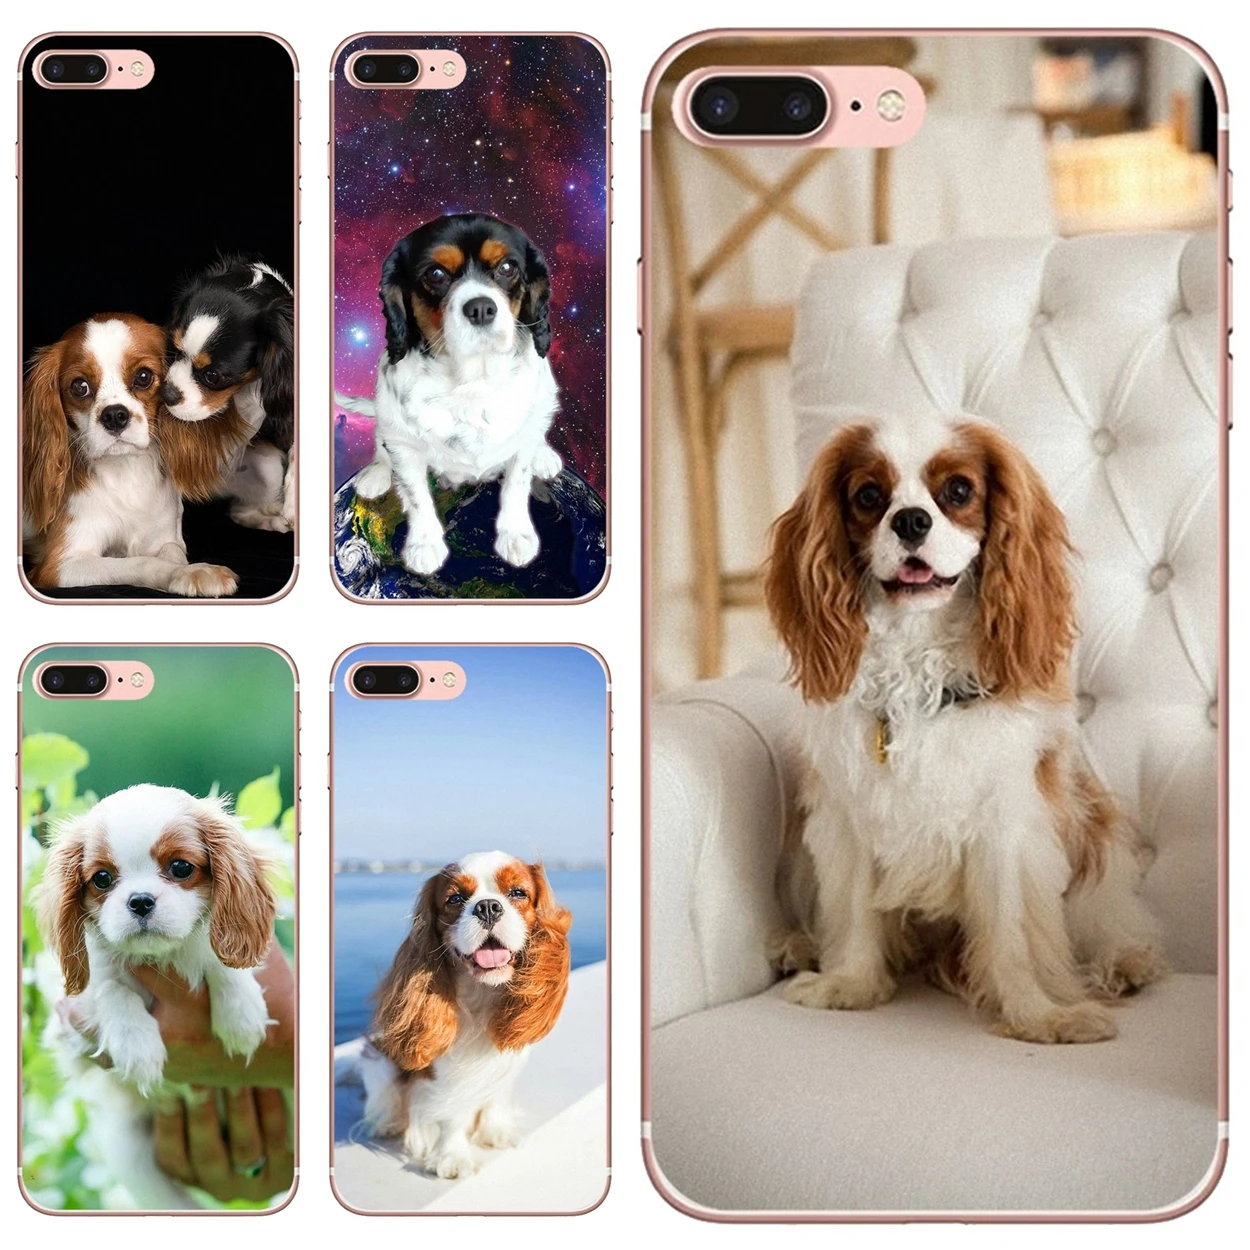 

Cavalier King Charles Spaniel Dog Soft Case For iPhone 10 11 12 13 Mini Pro 4S 5S SE 5C 6 6S 7 8 X XR XS Plus Max 2020